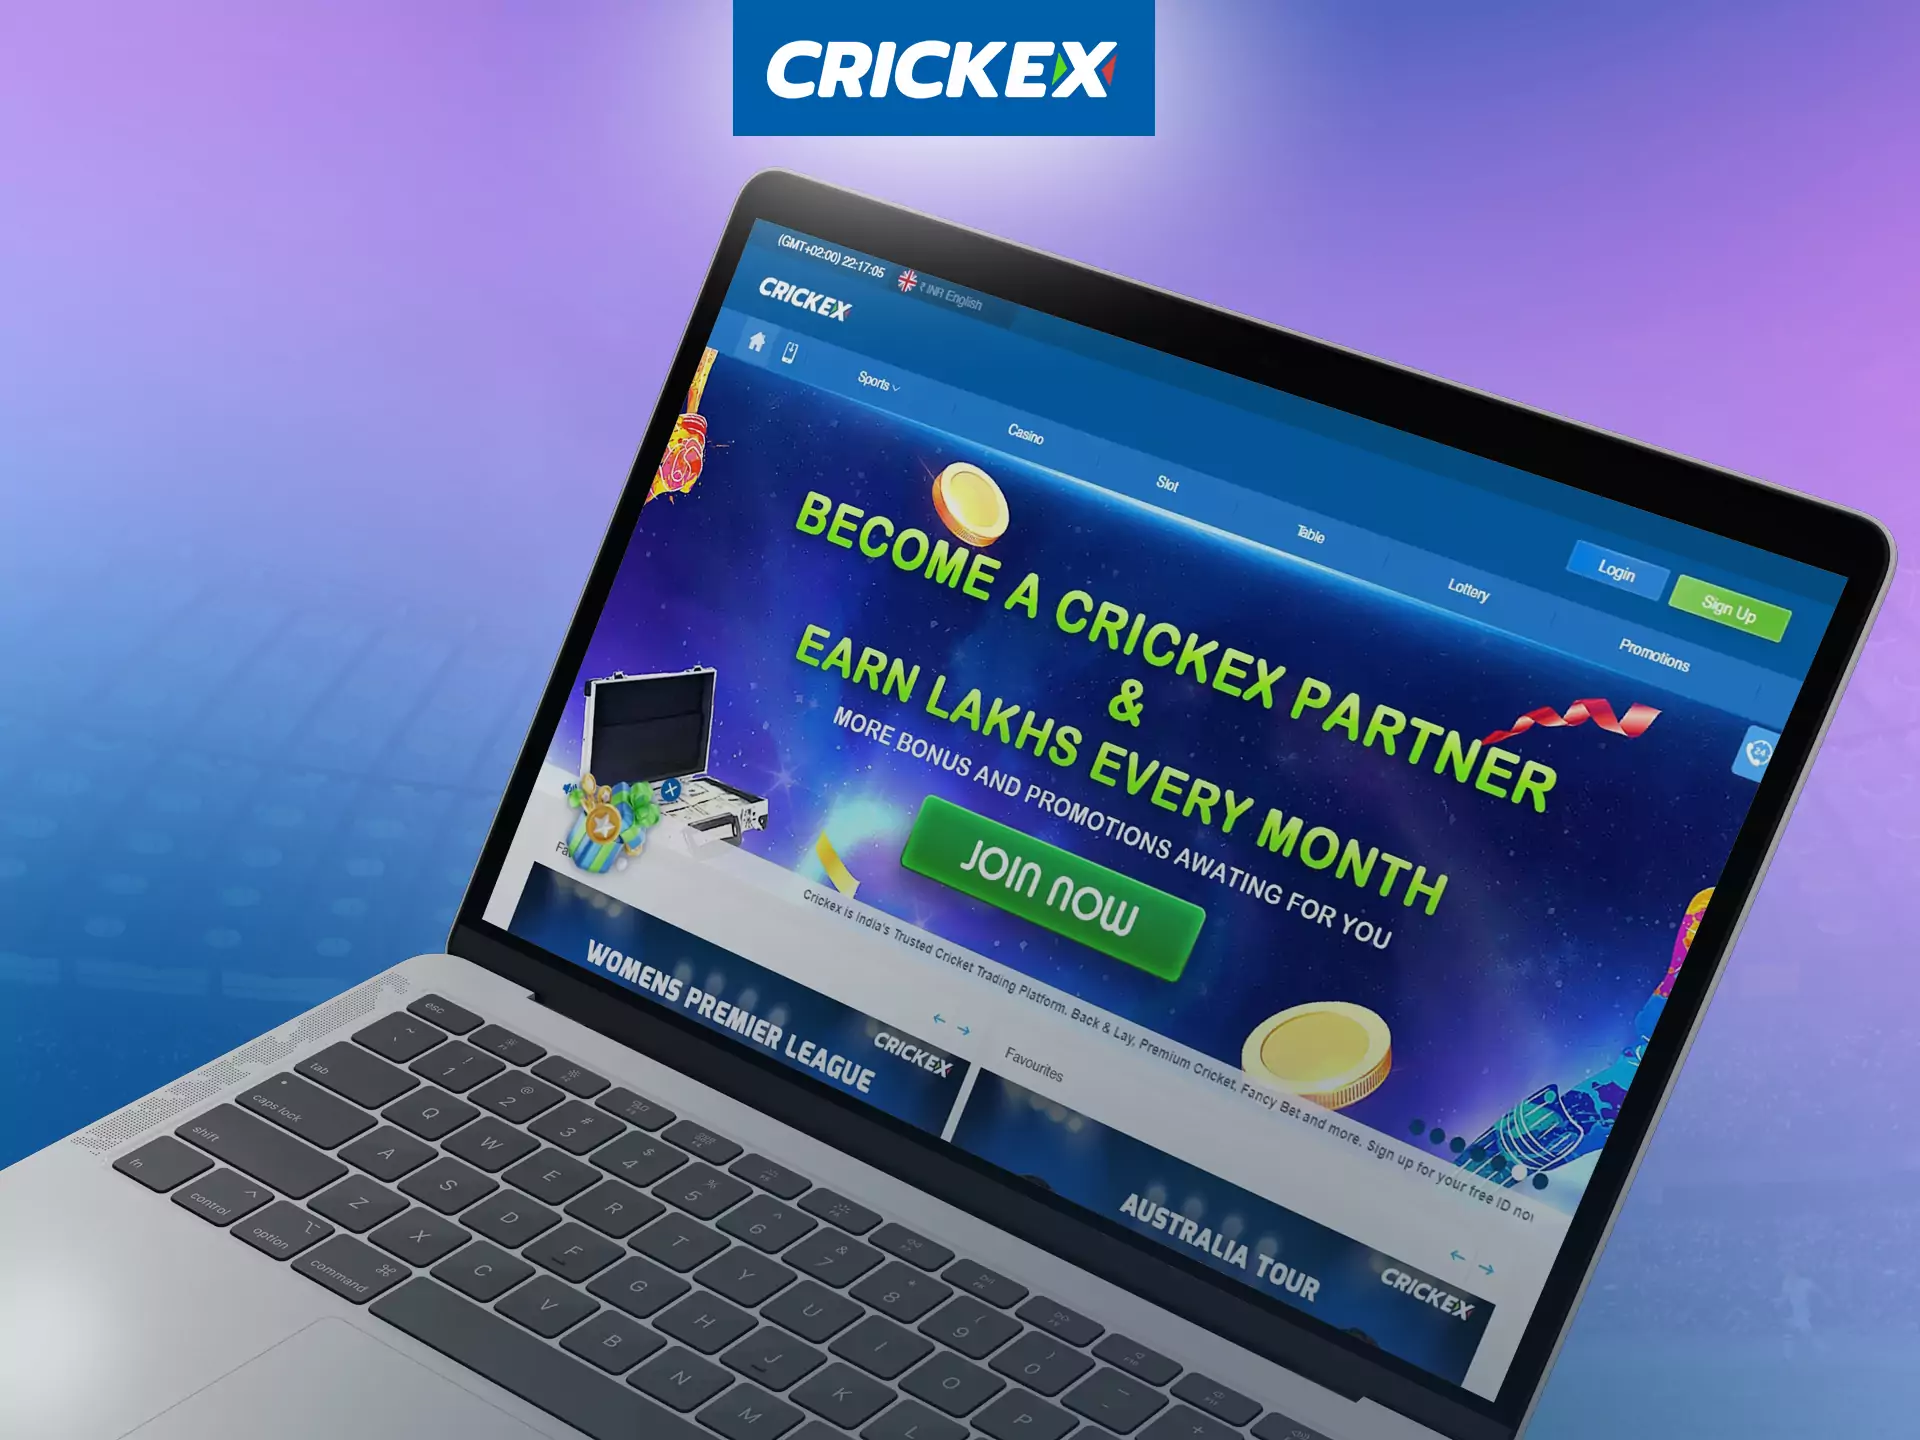 Crickex has an official site where you can bet, play in the casino and get a lot of bonuses.